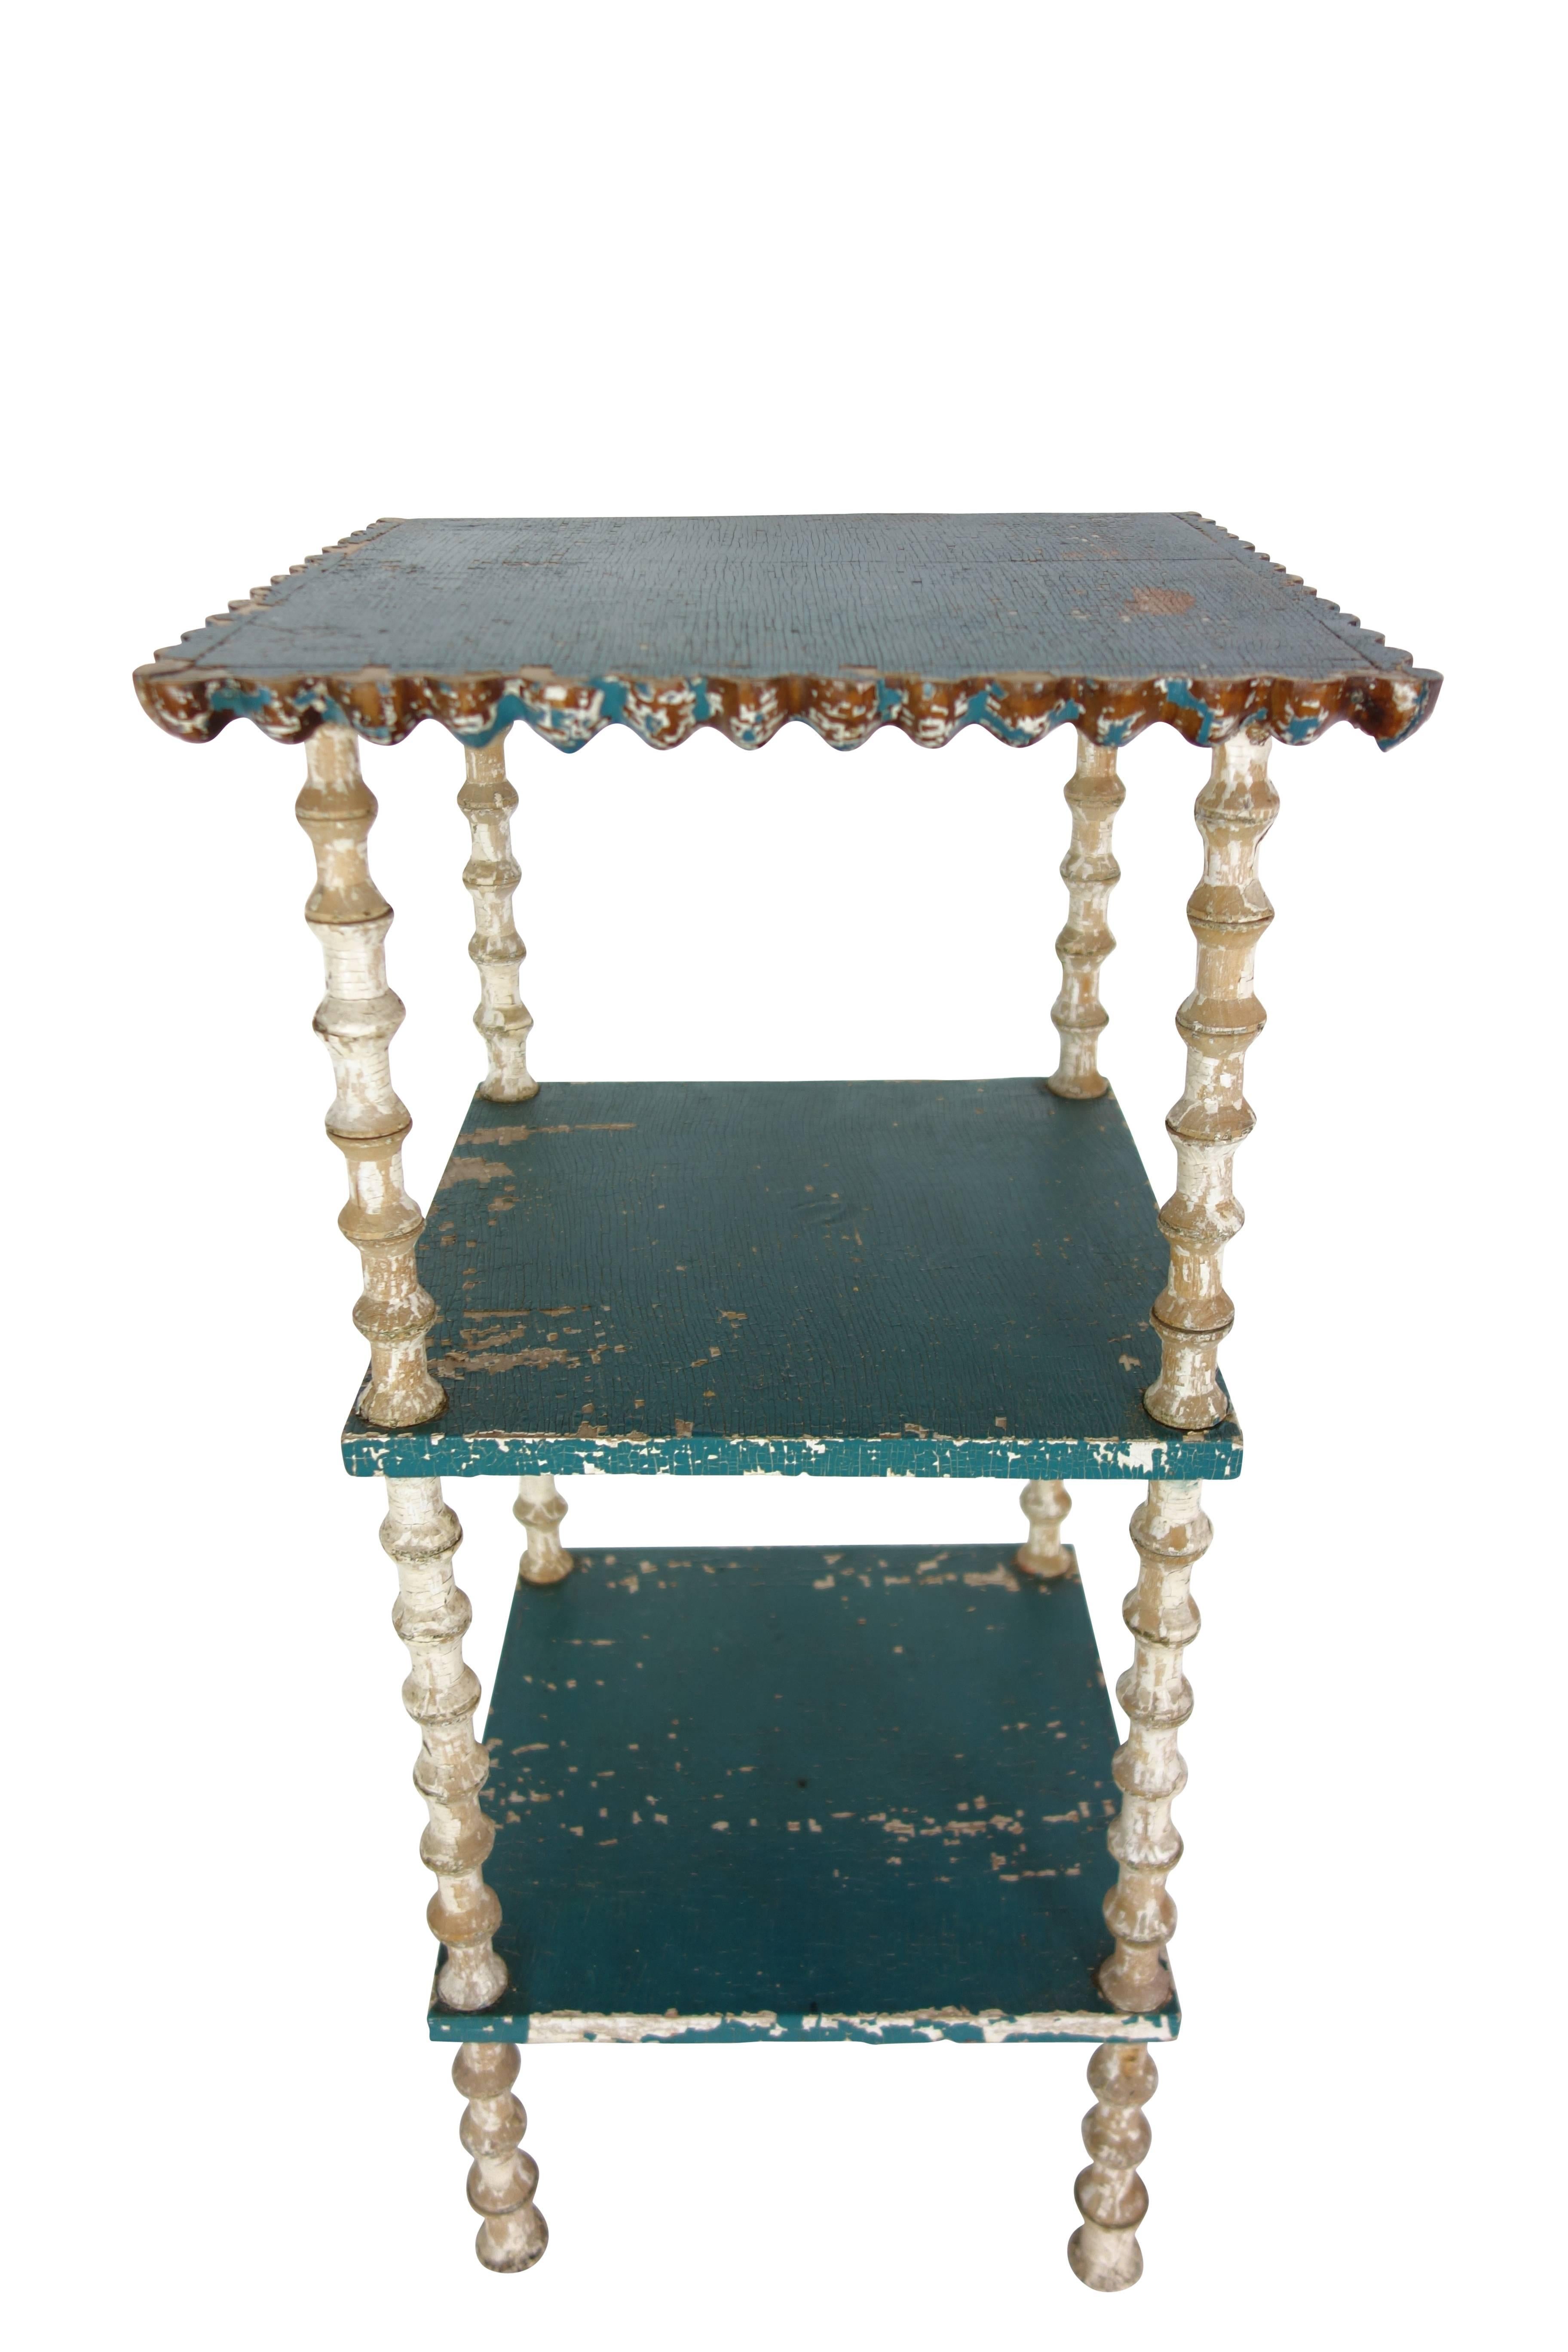 American Painted Three-Tiered Spool Side Table with Turtle on Underside, Dated 1895